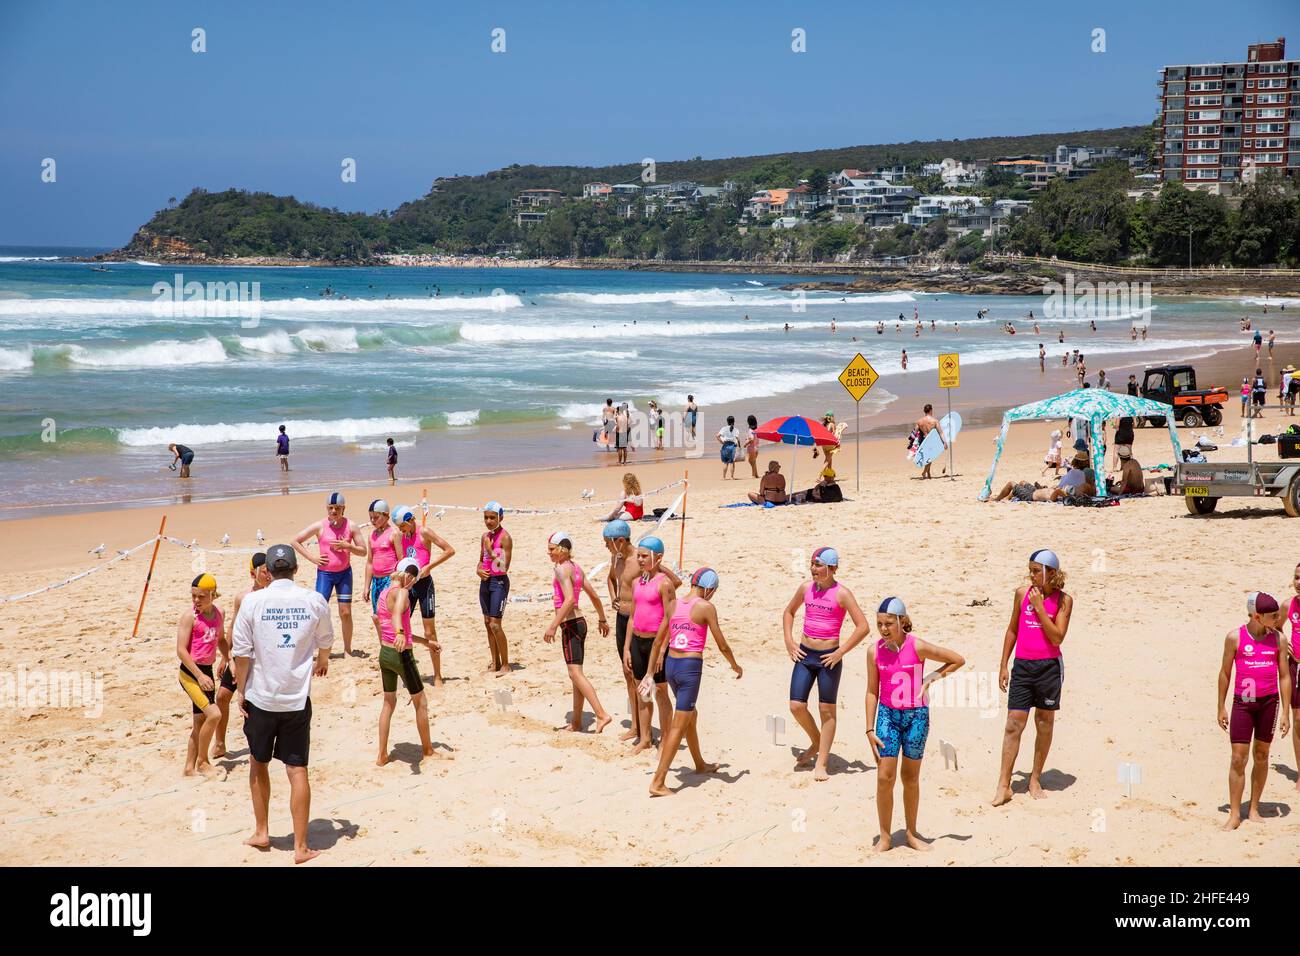 Nippers events, children and young lifesavers  on Manly Beach Sydney doing Nippers events for junior surf rescue, Sydney,NSW,Australia Stock Photo